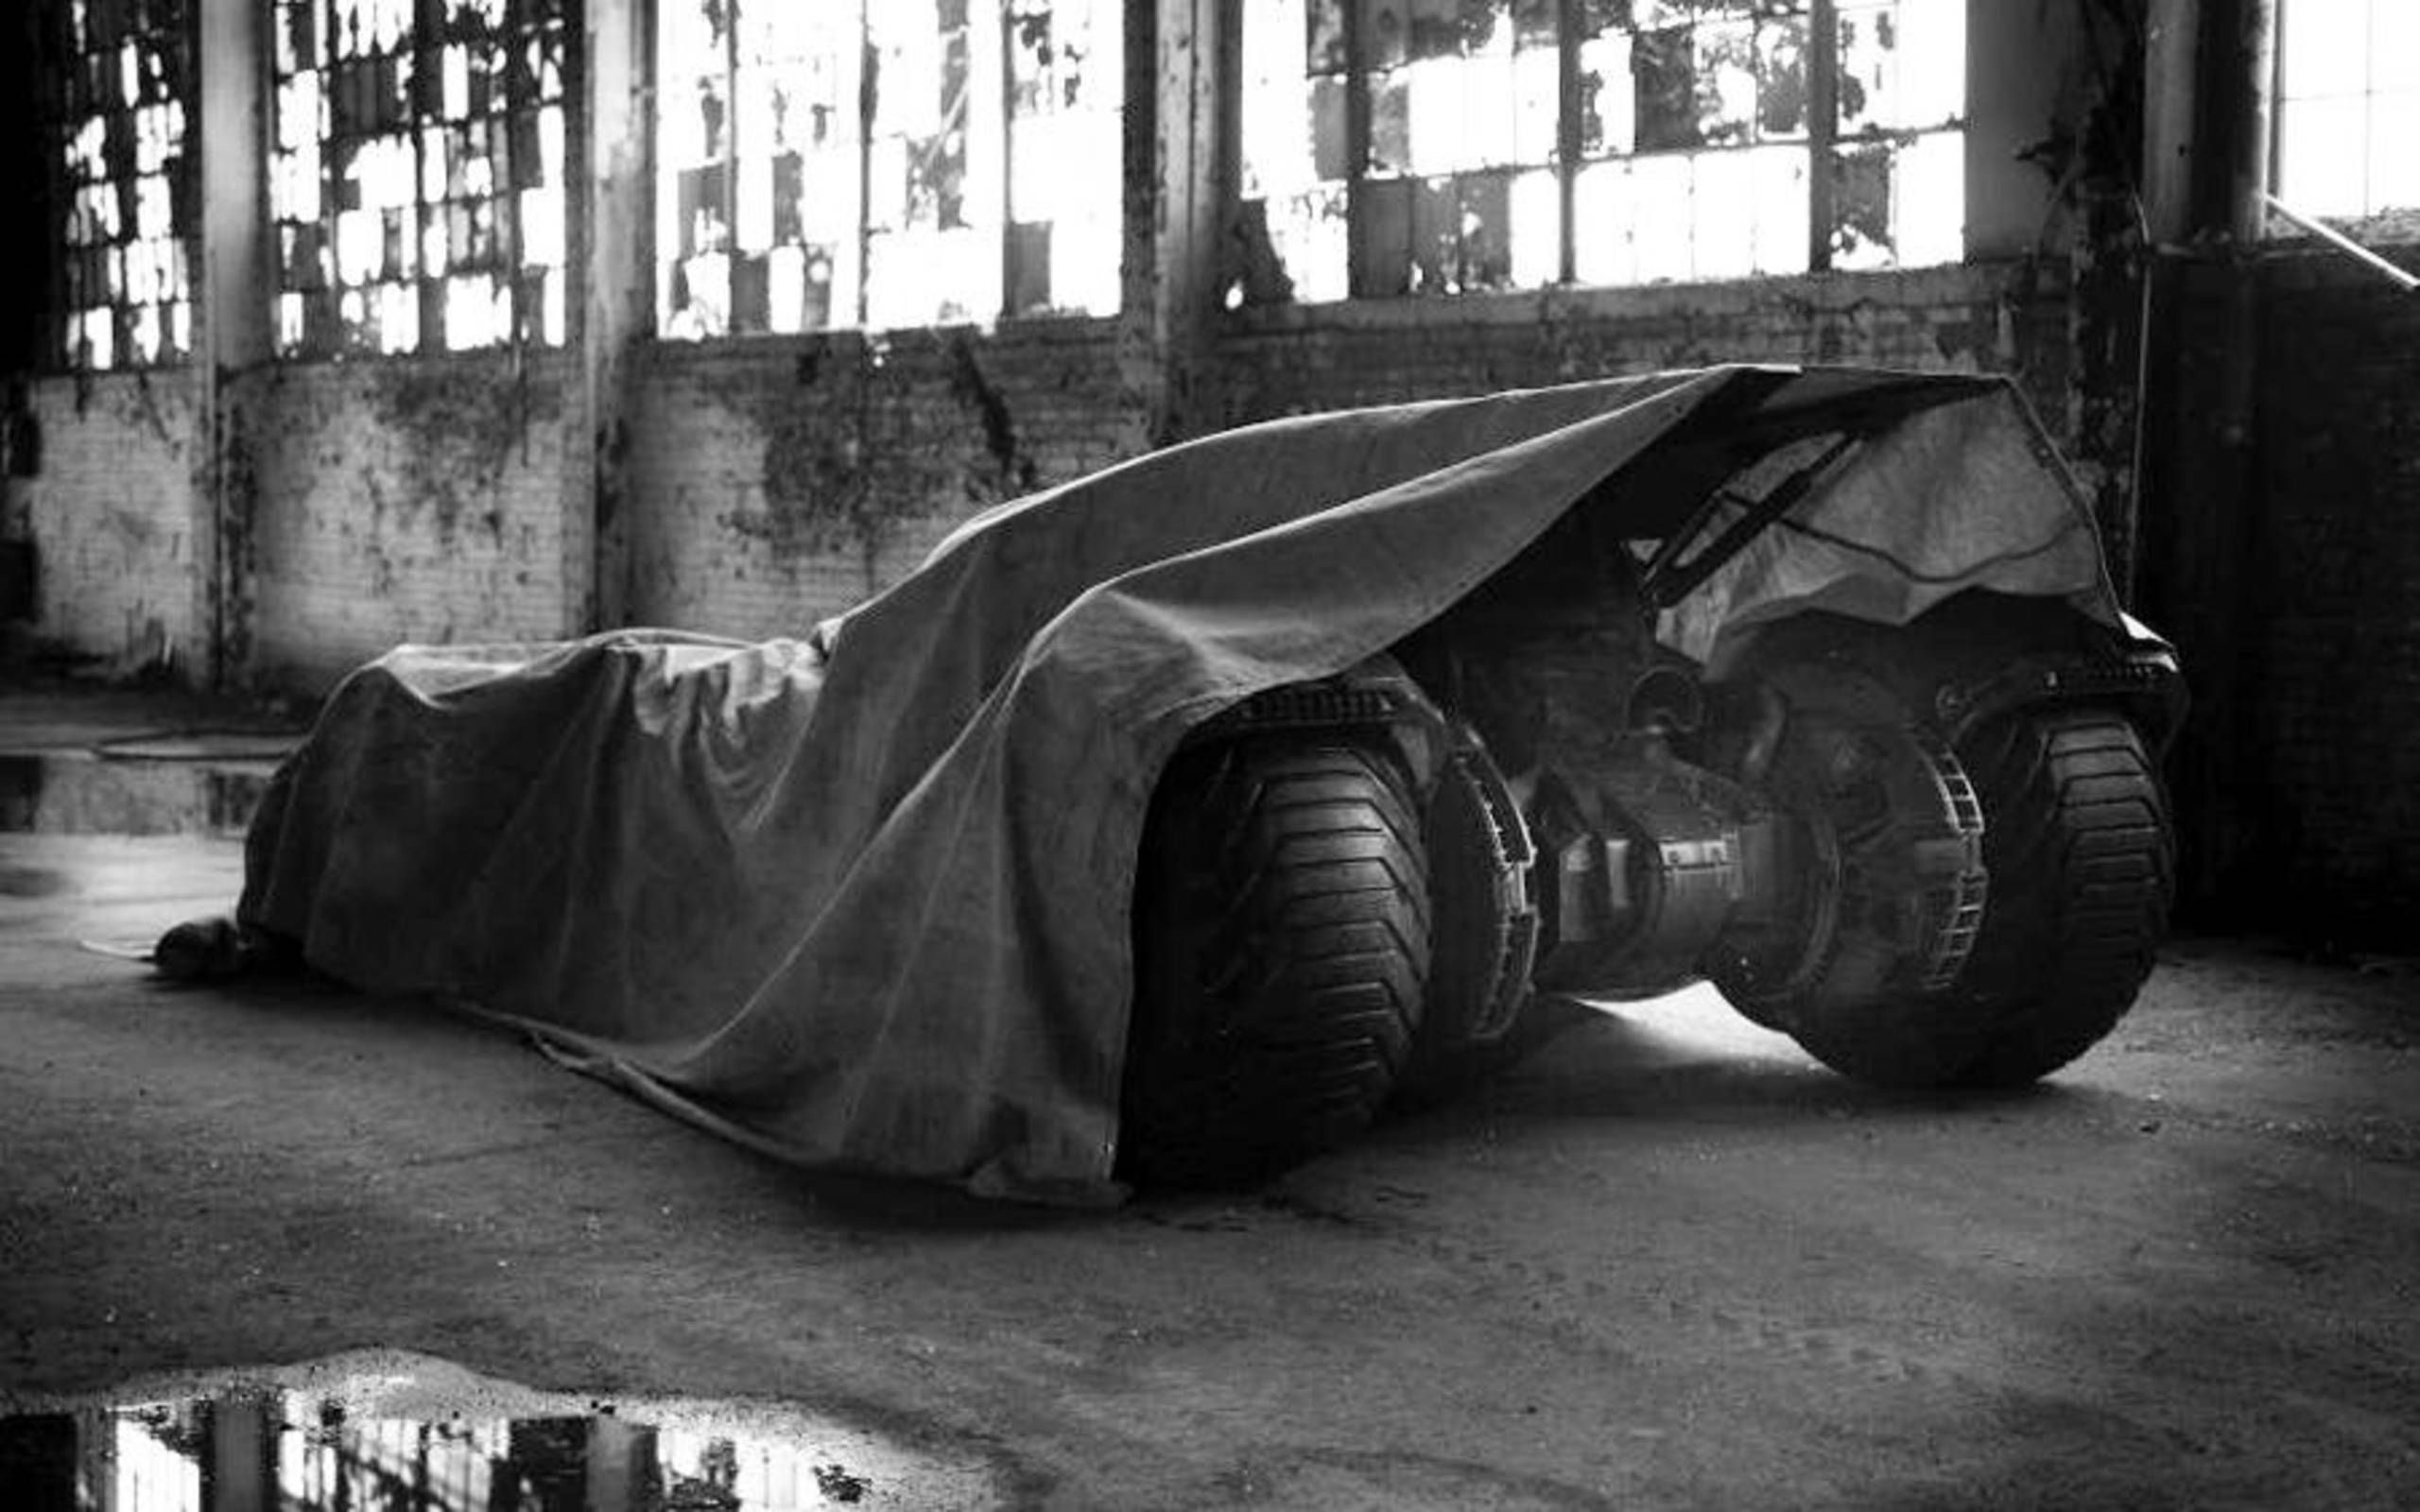 The Batmobile returns to its roots